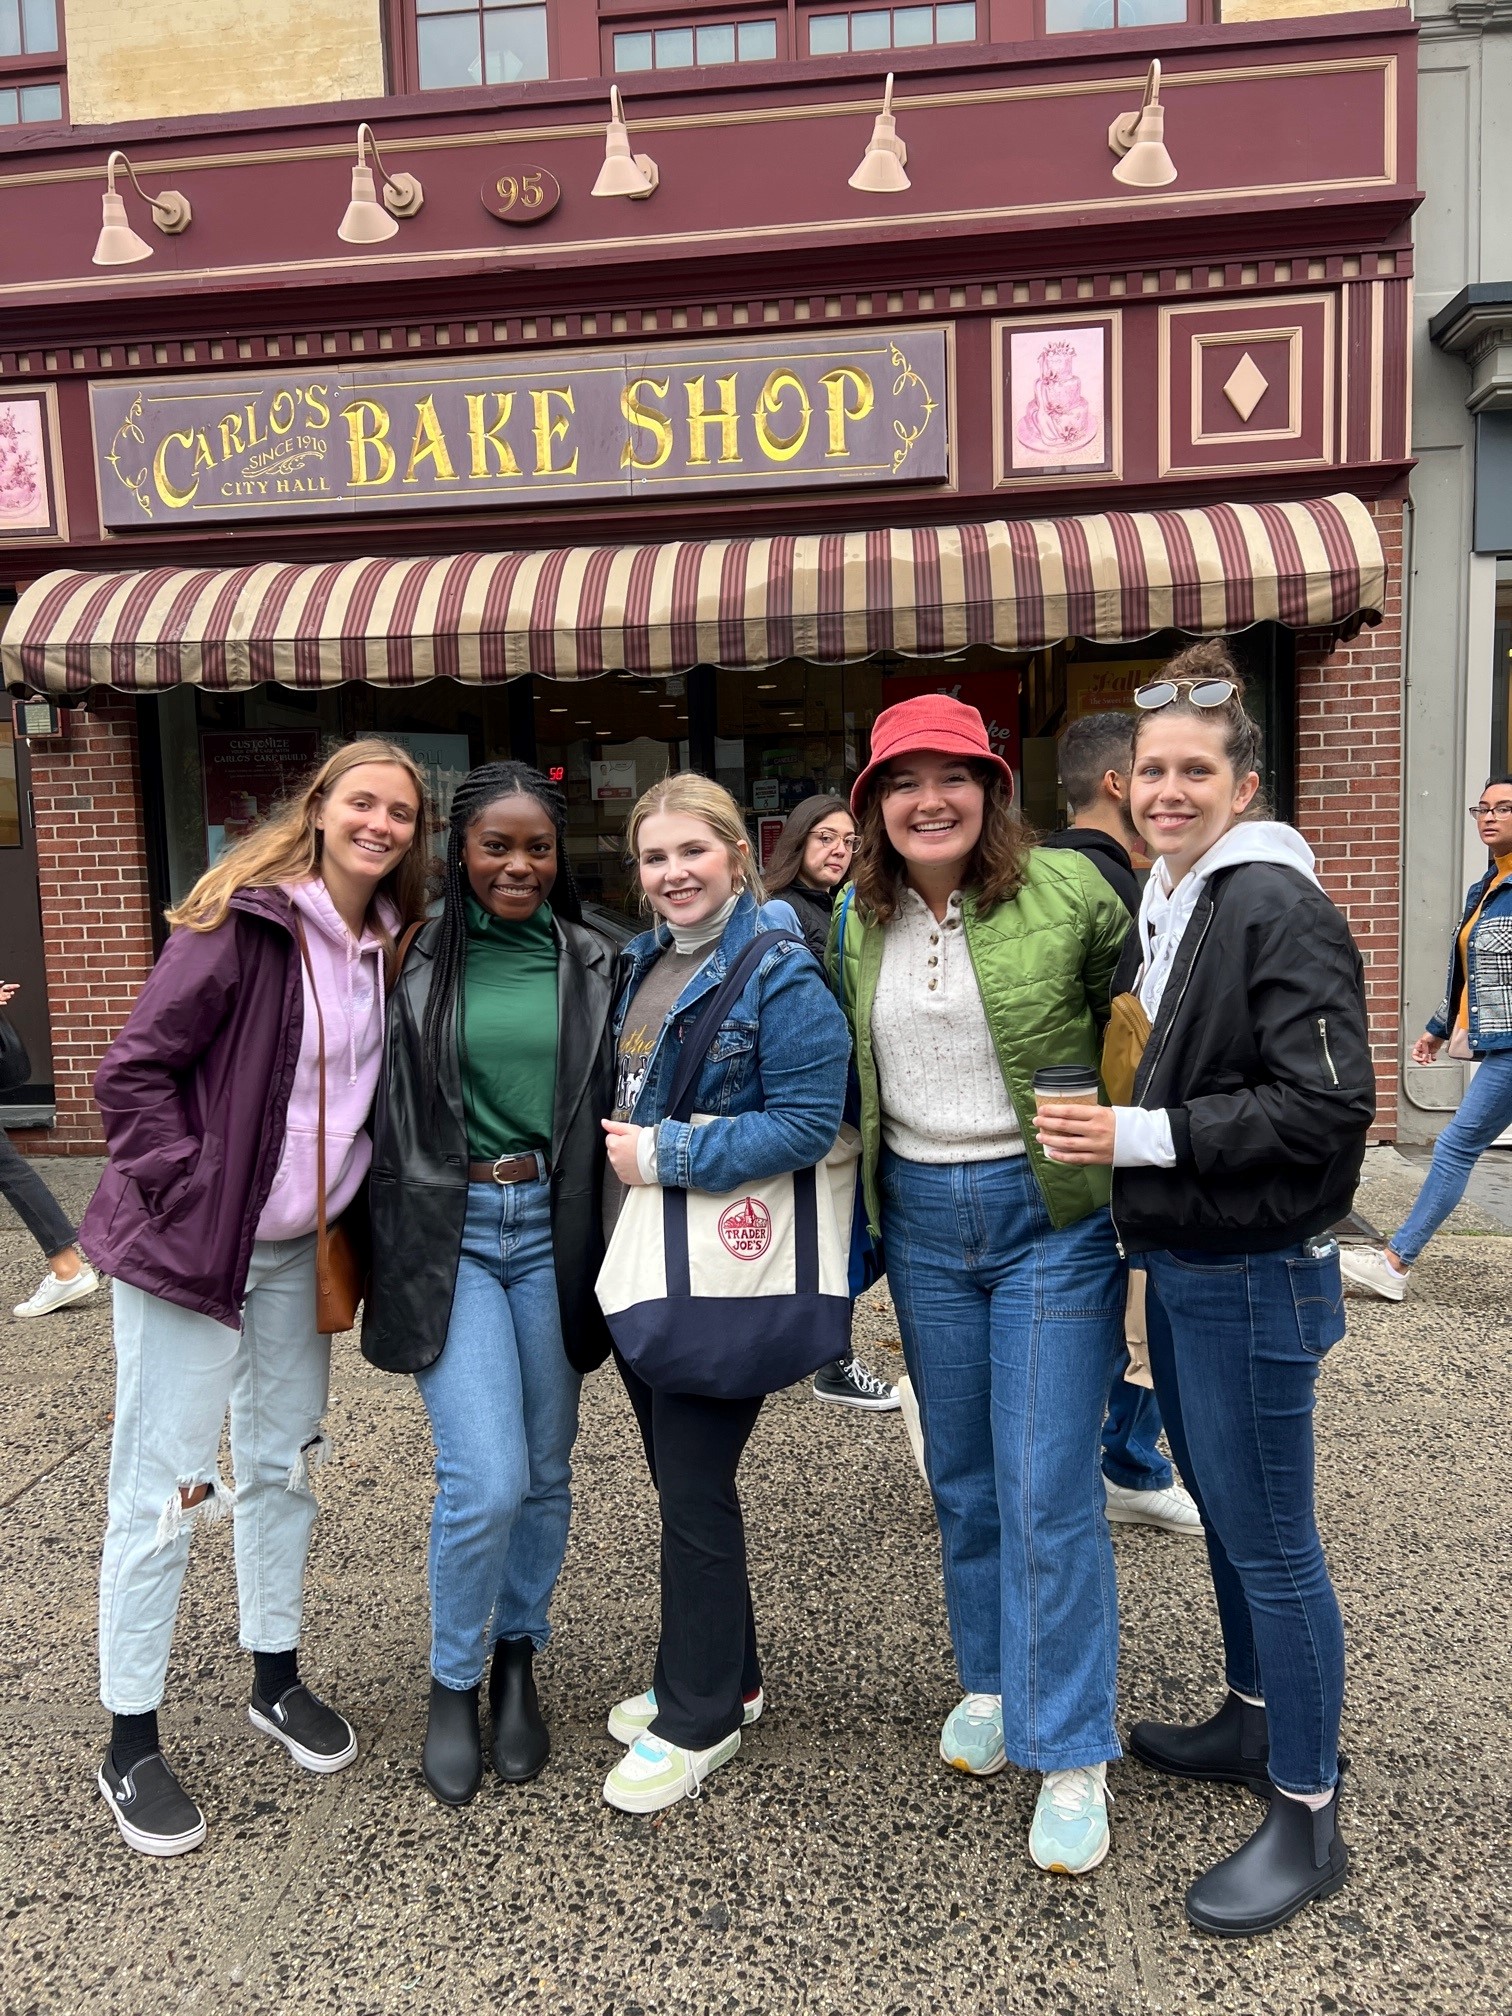 Belmont East students pose for picture in front of Carlo's bake shop